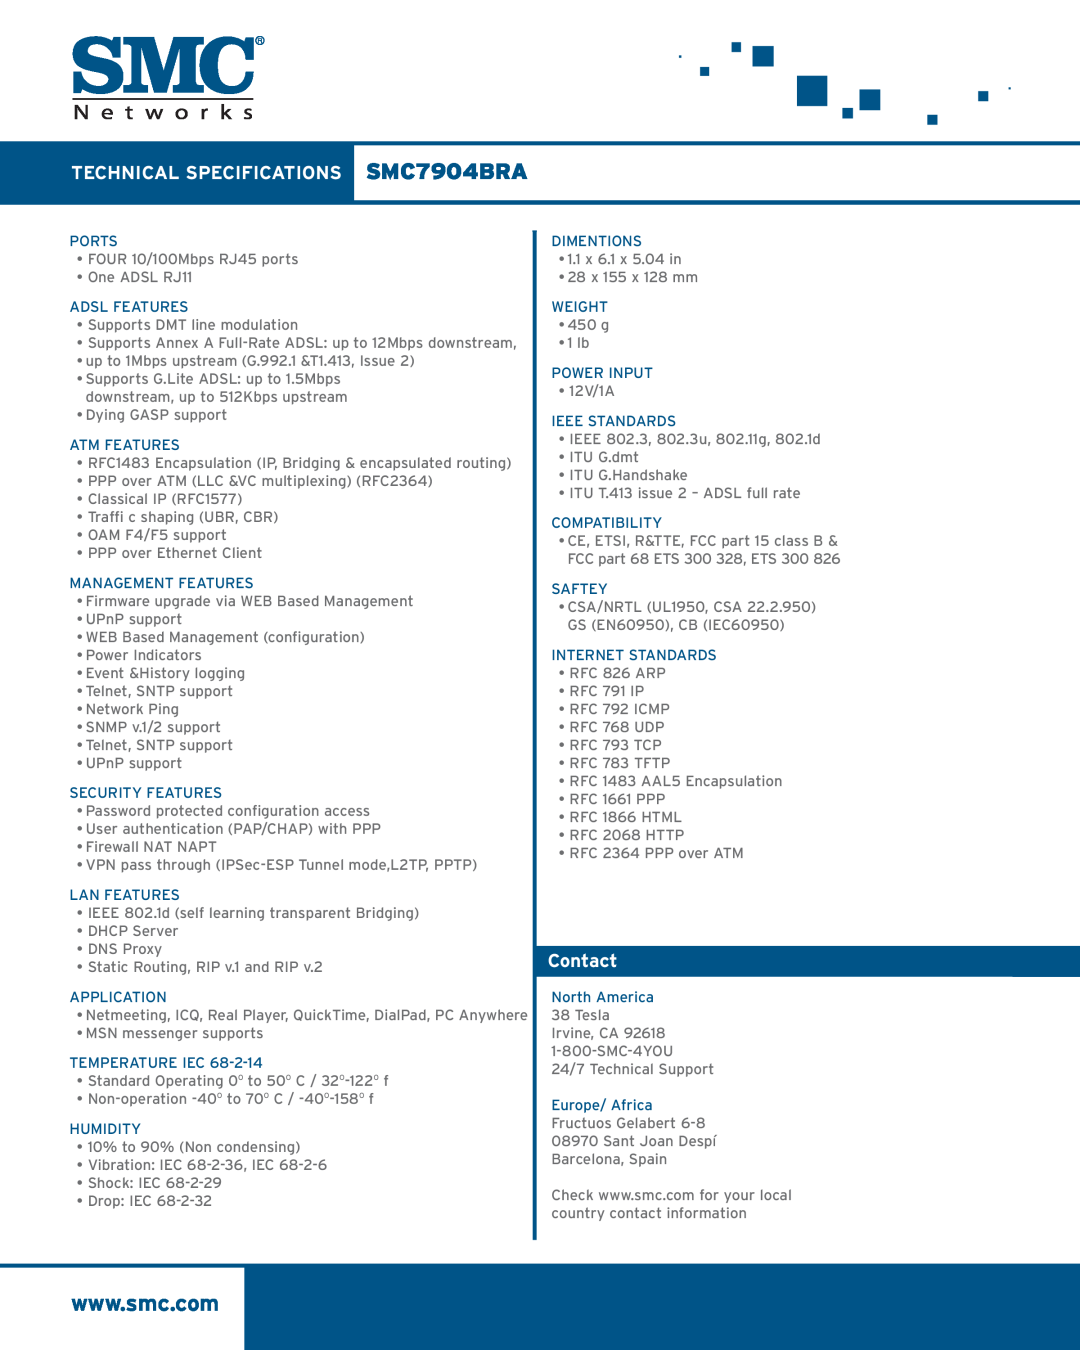 SMC Networks manual TECHNICAL SPECIFICATIONS SMC7904BRA, Contact 